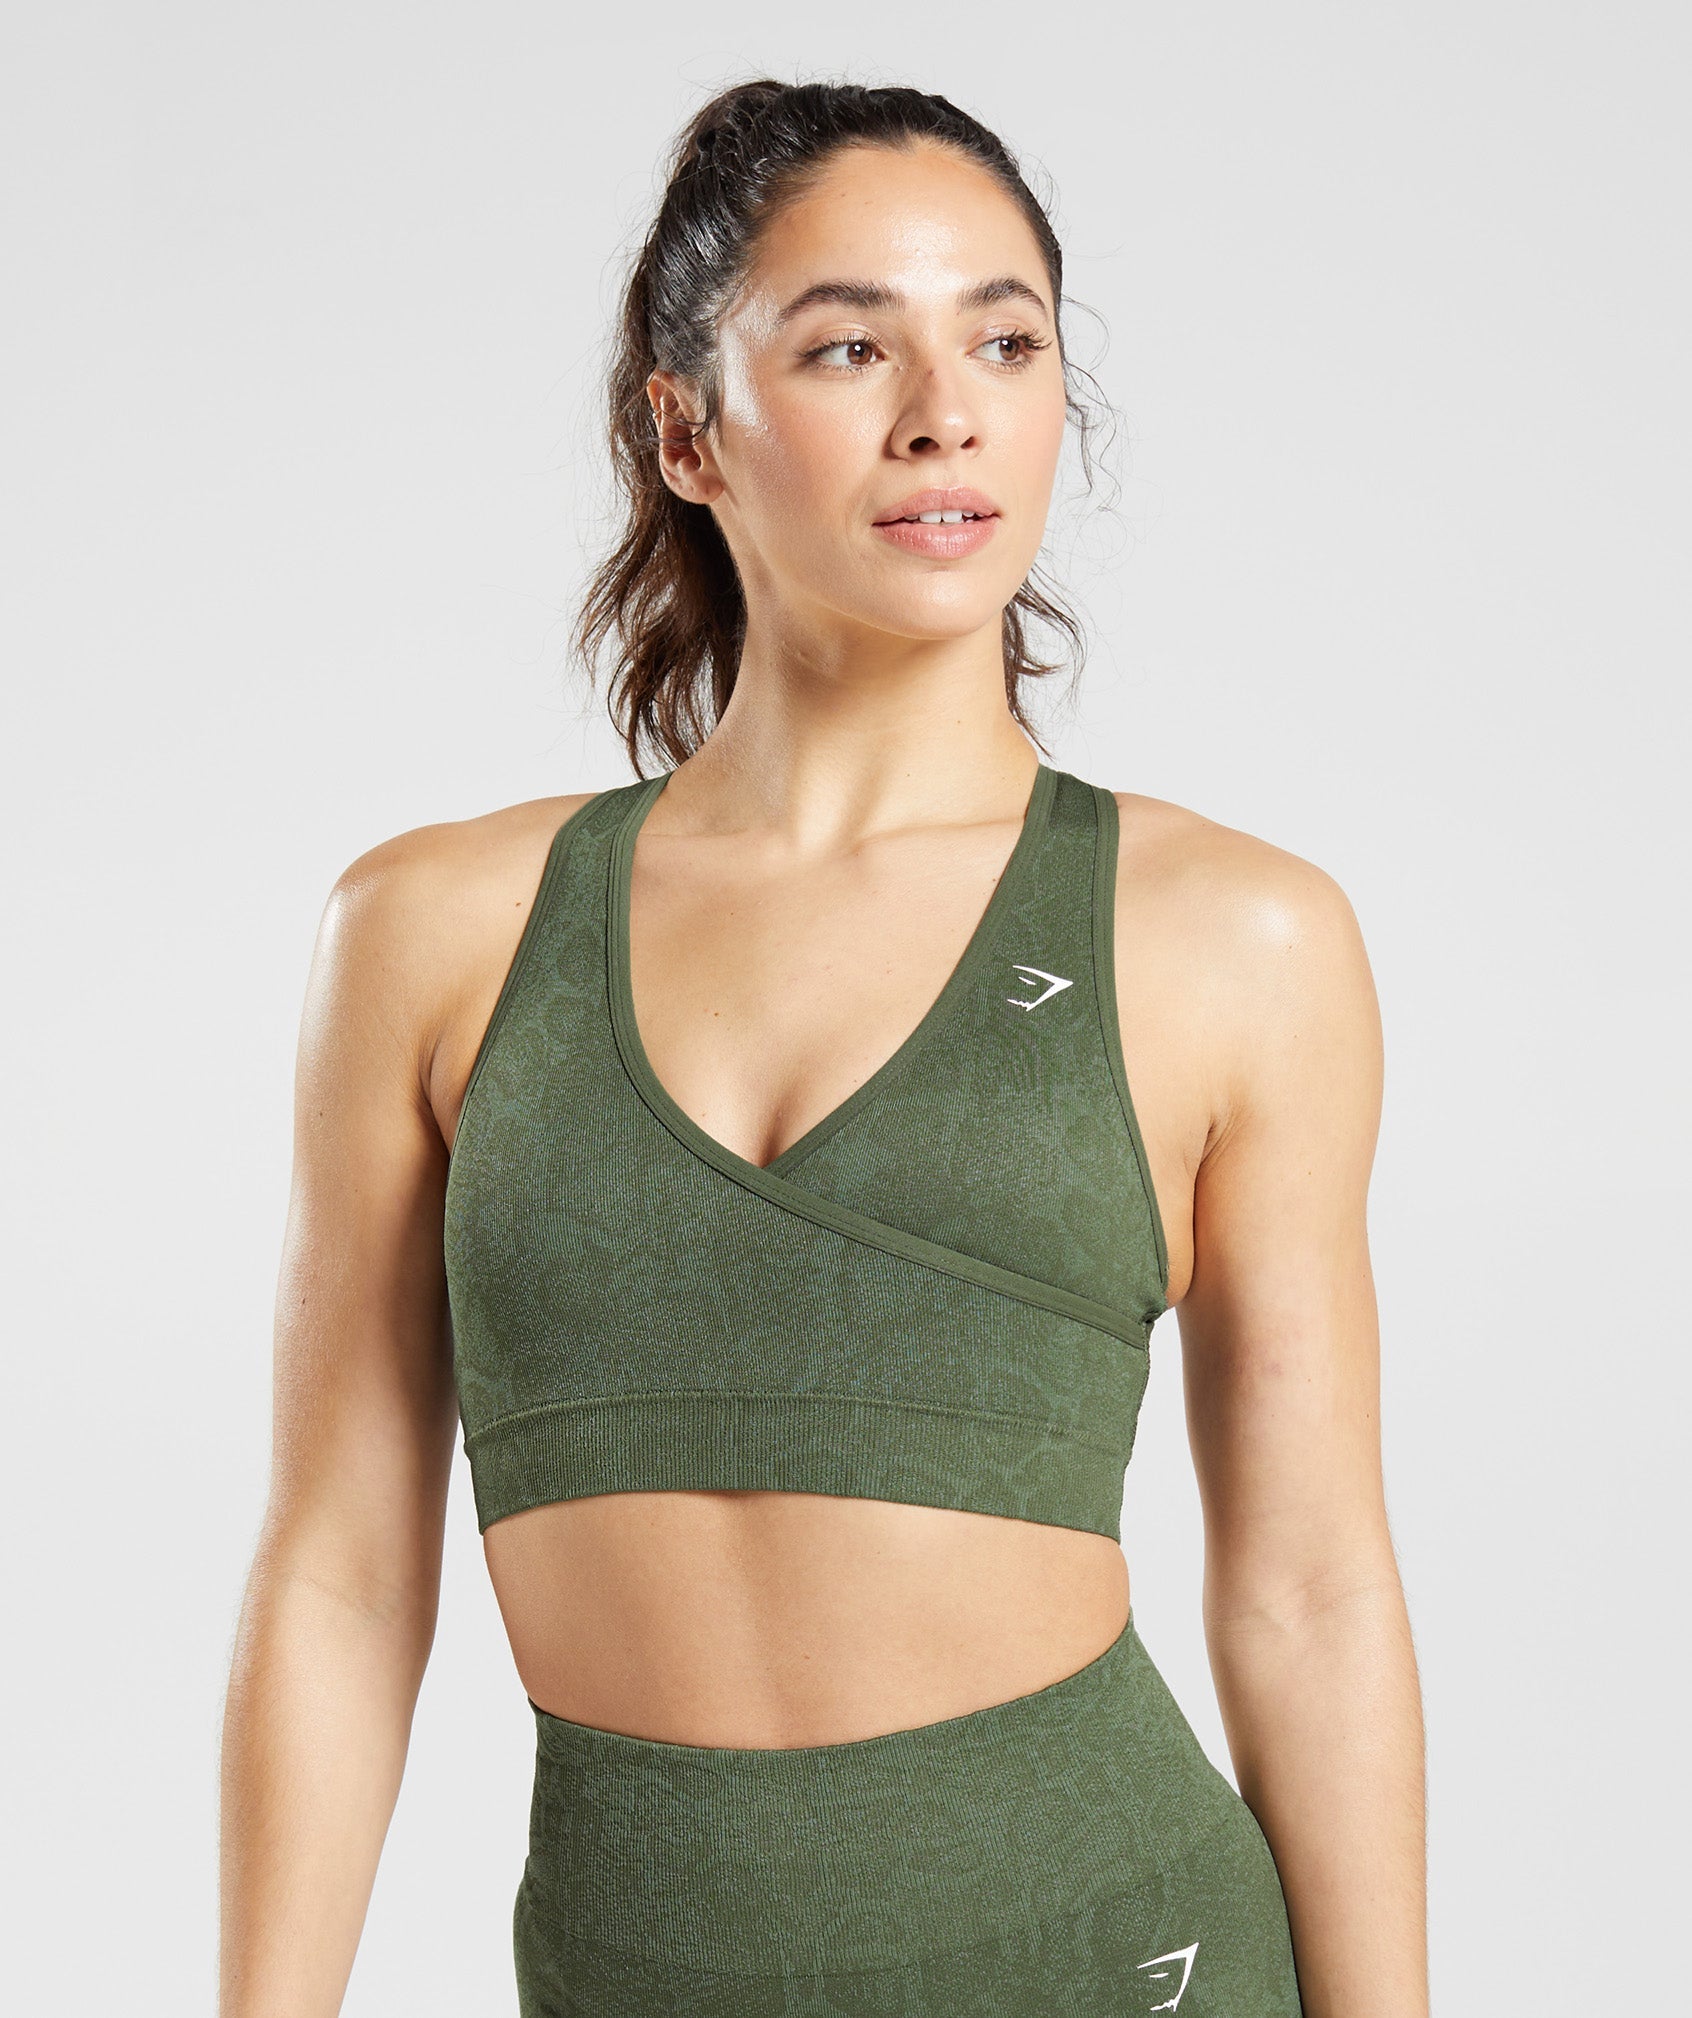 ASOS 4505 Seamless sculpting shorts and support bra in light green